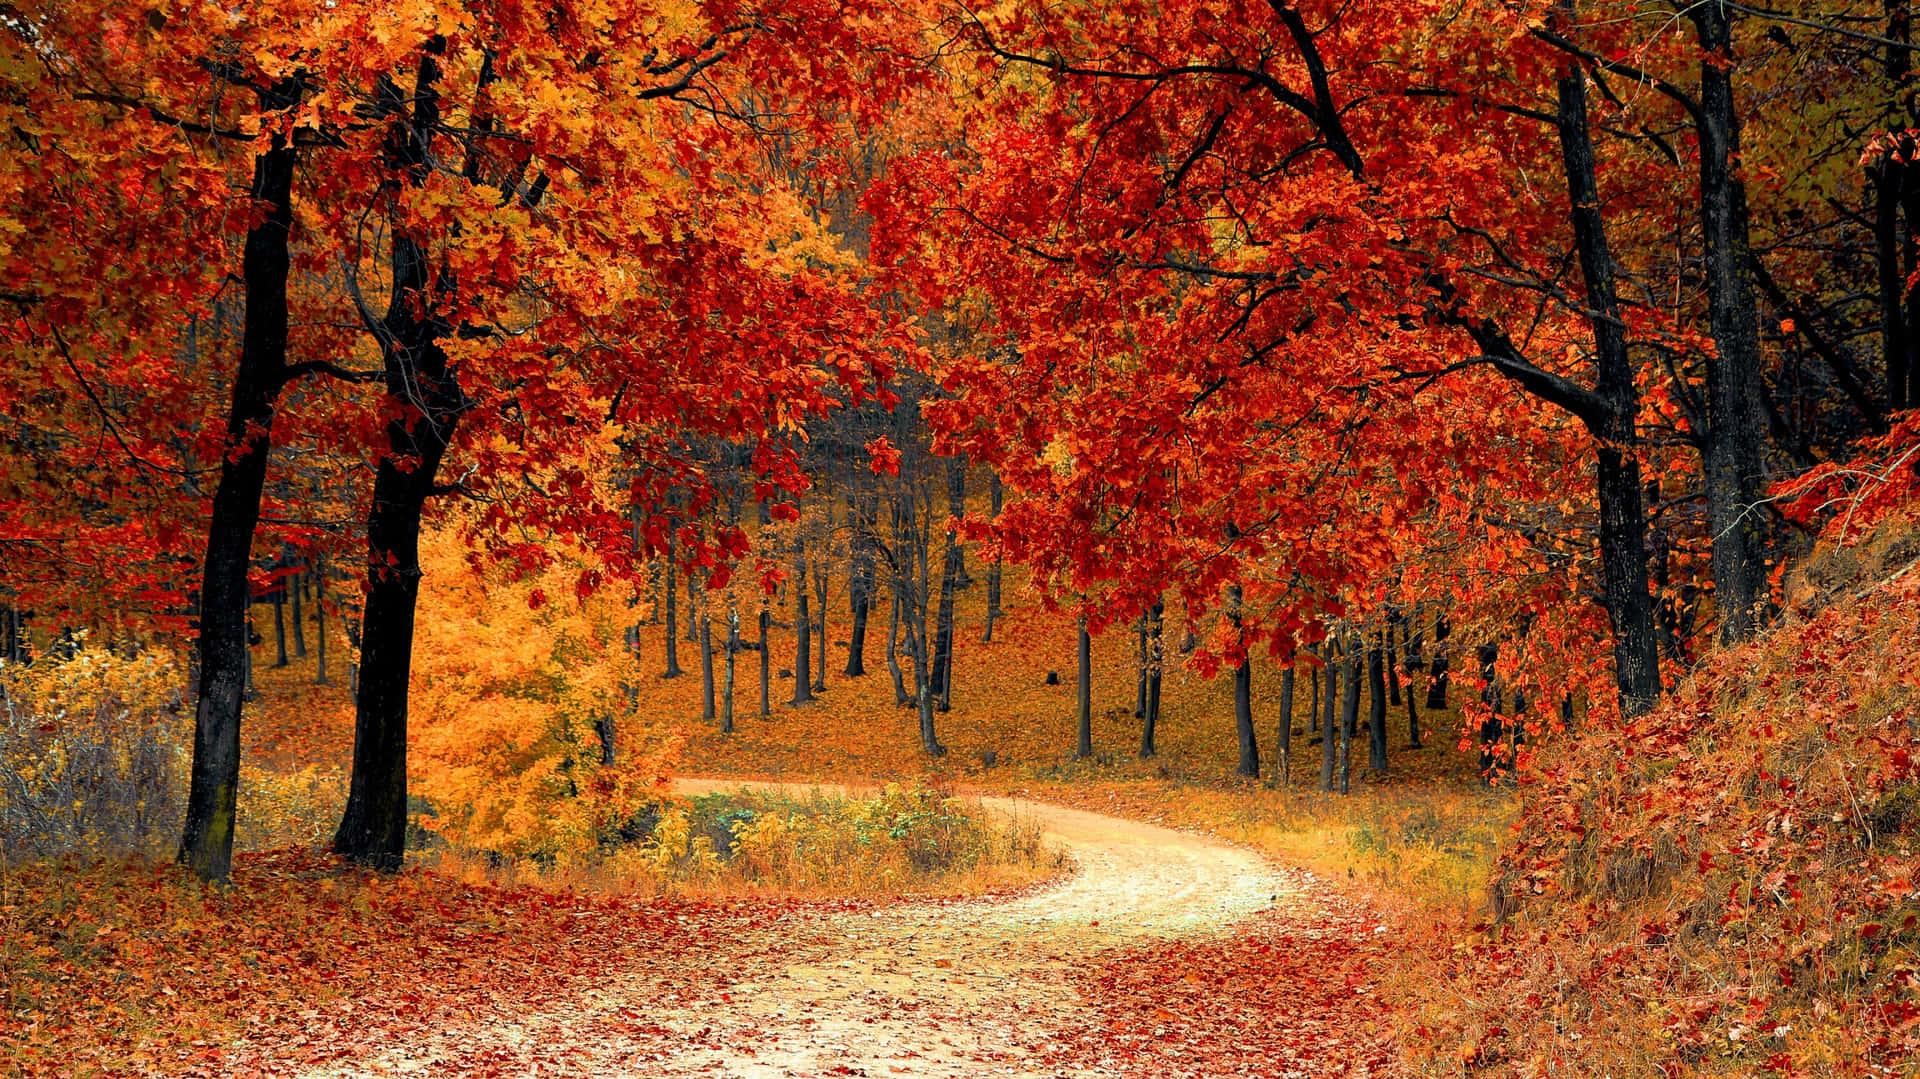 Enjoy The Beauty Of Autumn In This X Image